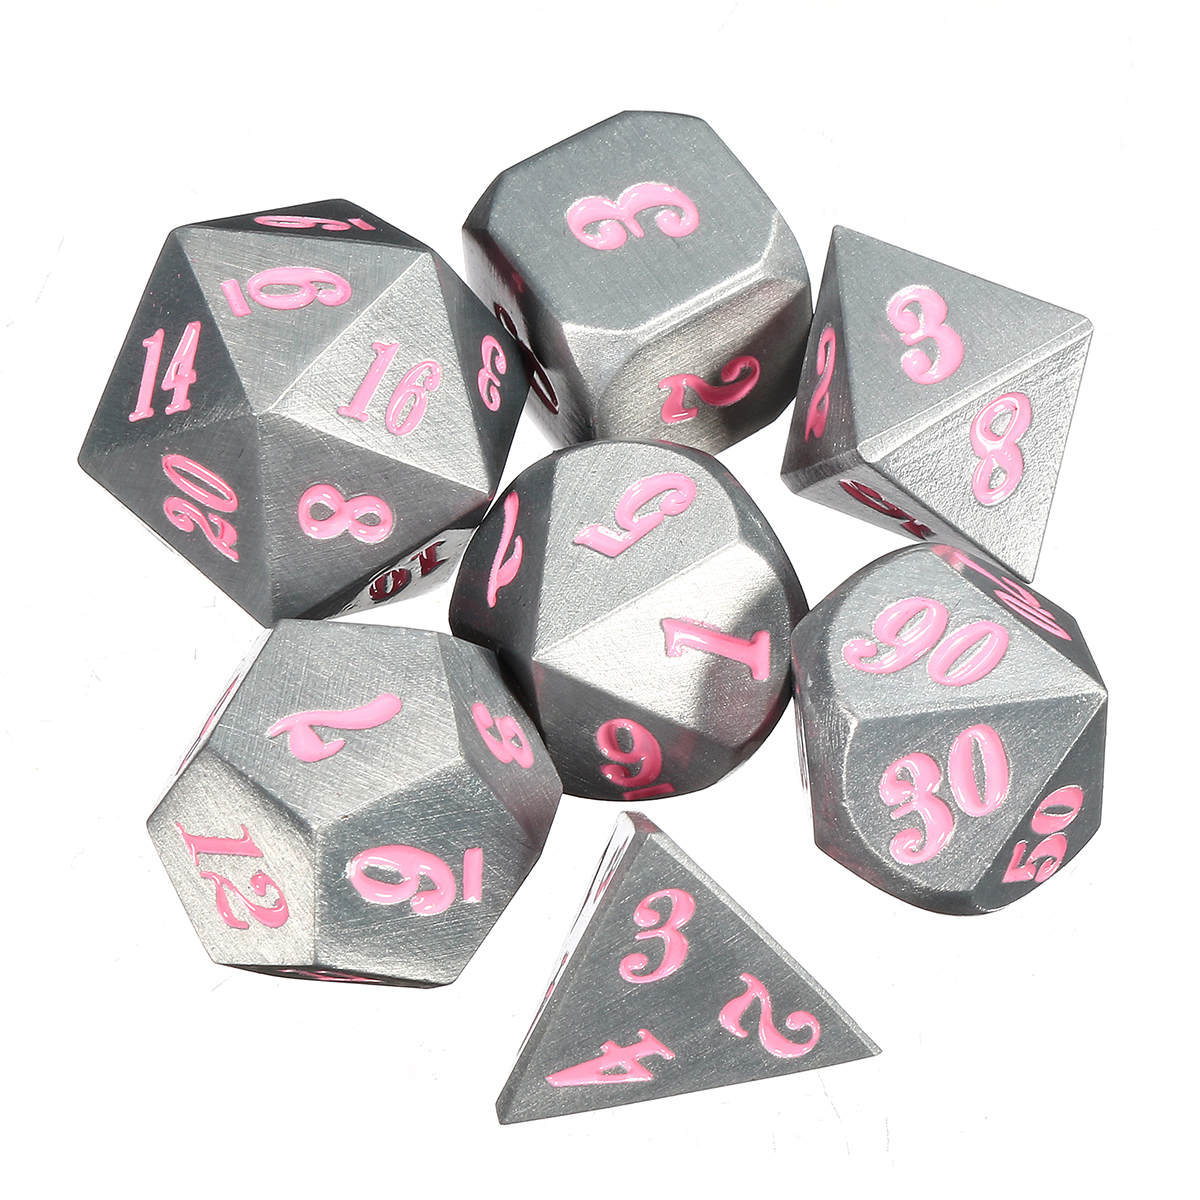 7Pc-Solid-Metal-Heavy-Dice-Set-Polyhedral-Dices-Role-Playing-Games-Dice-Gadget-RPG-1391316-10